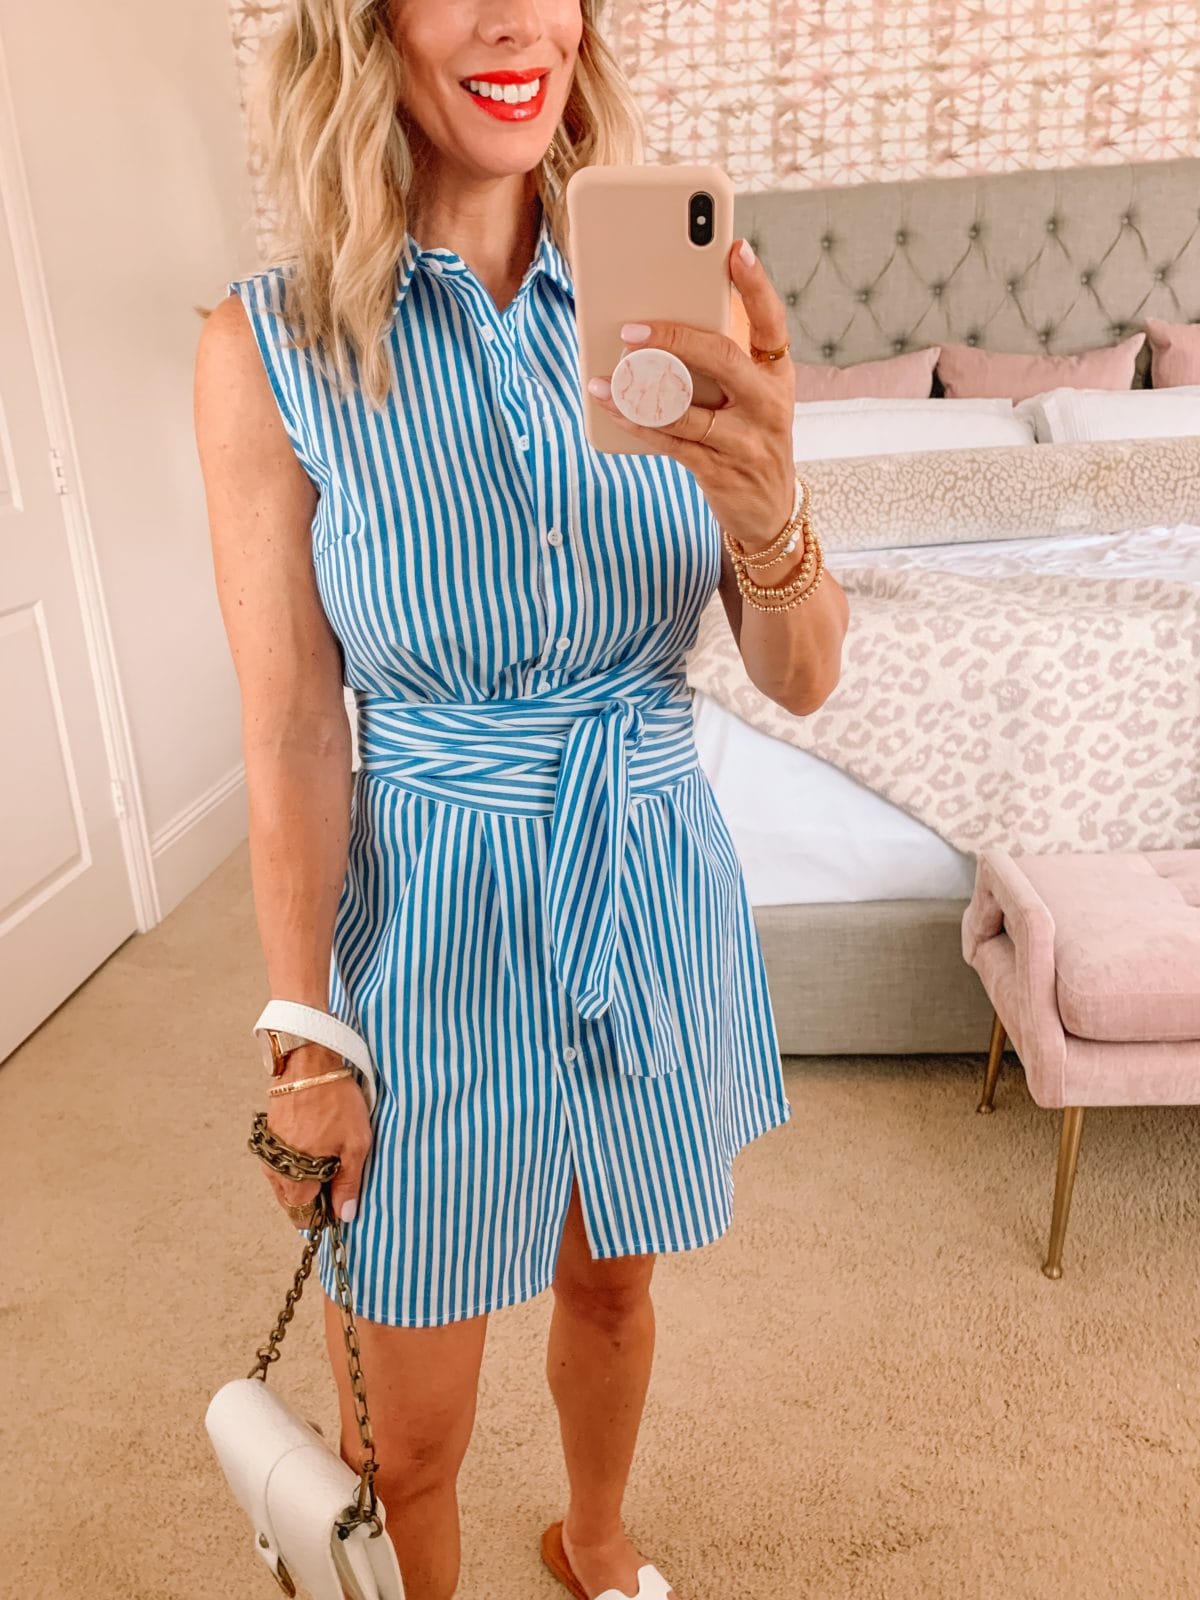 Amazon Fashion Faves, Striped Dress and White Sandals, Crossbody Bag 